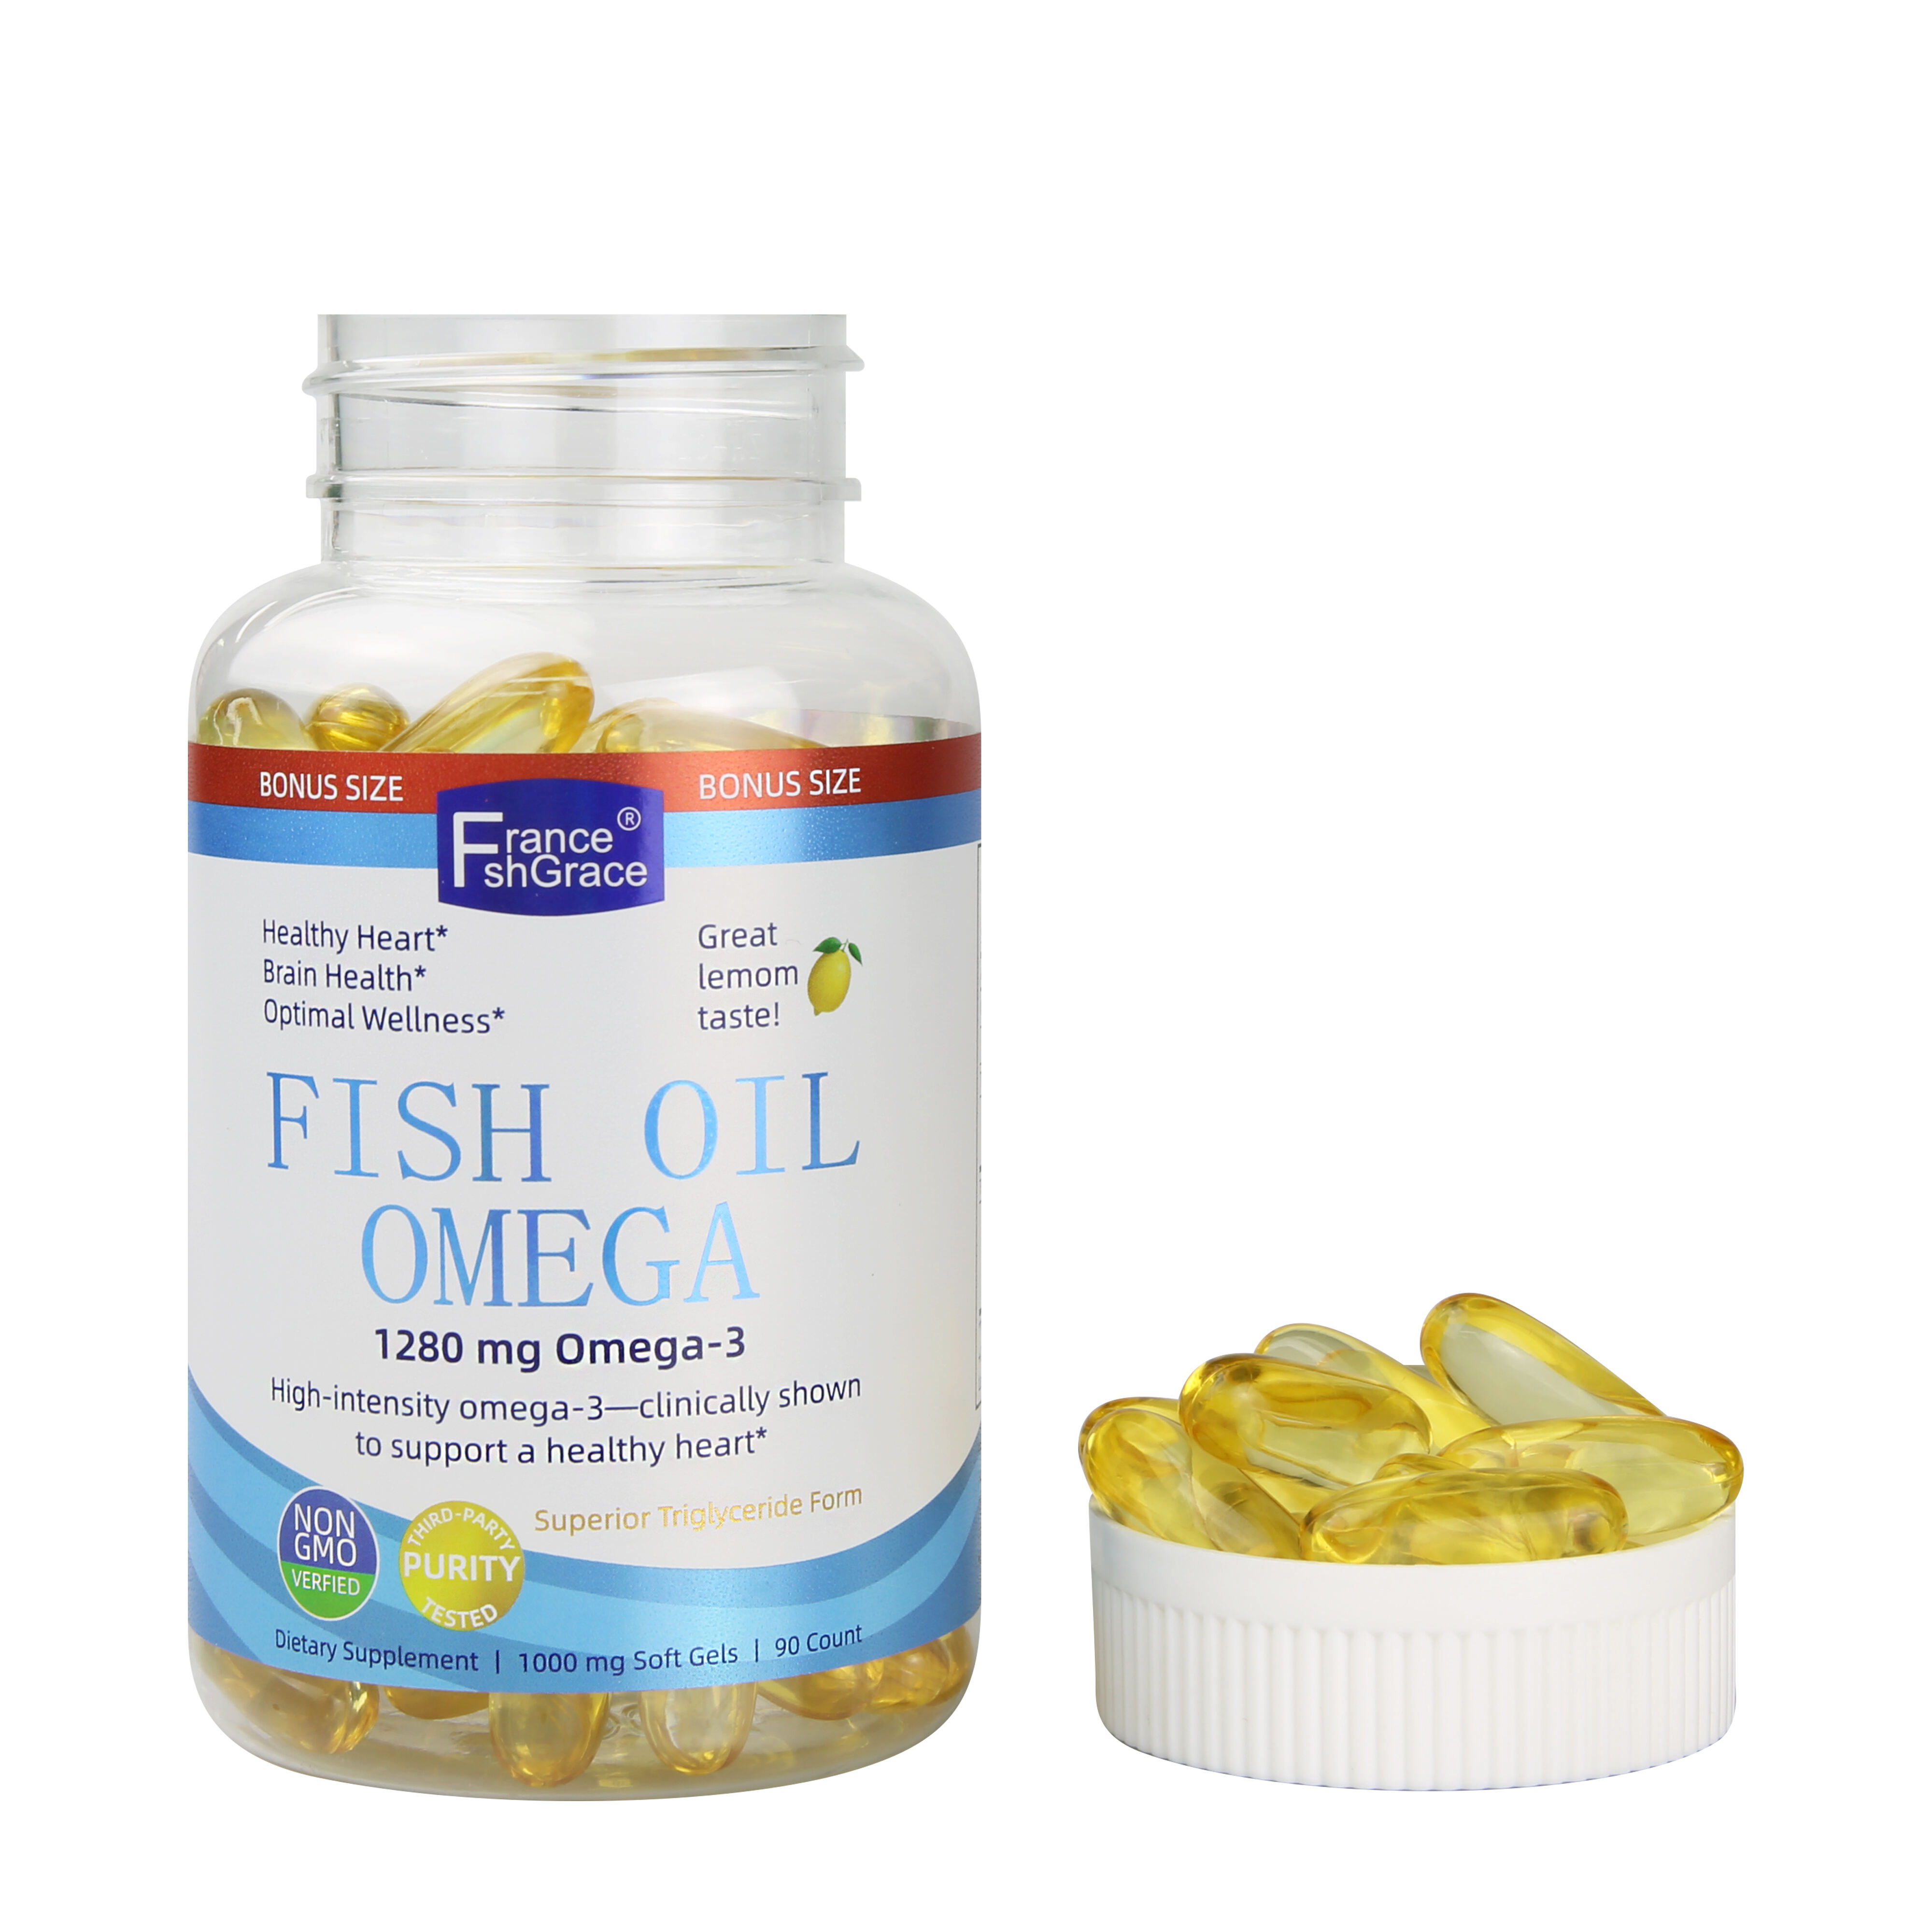 Omega 3 Fish Oil with Private Label details